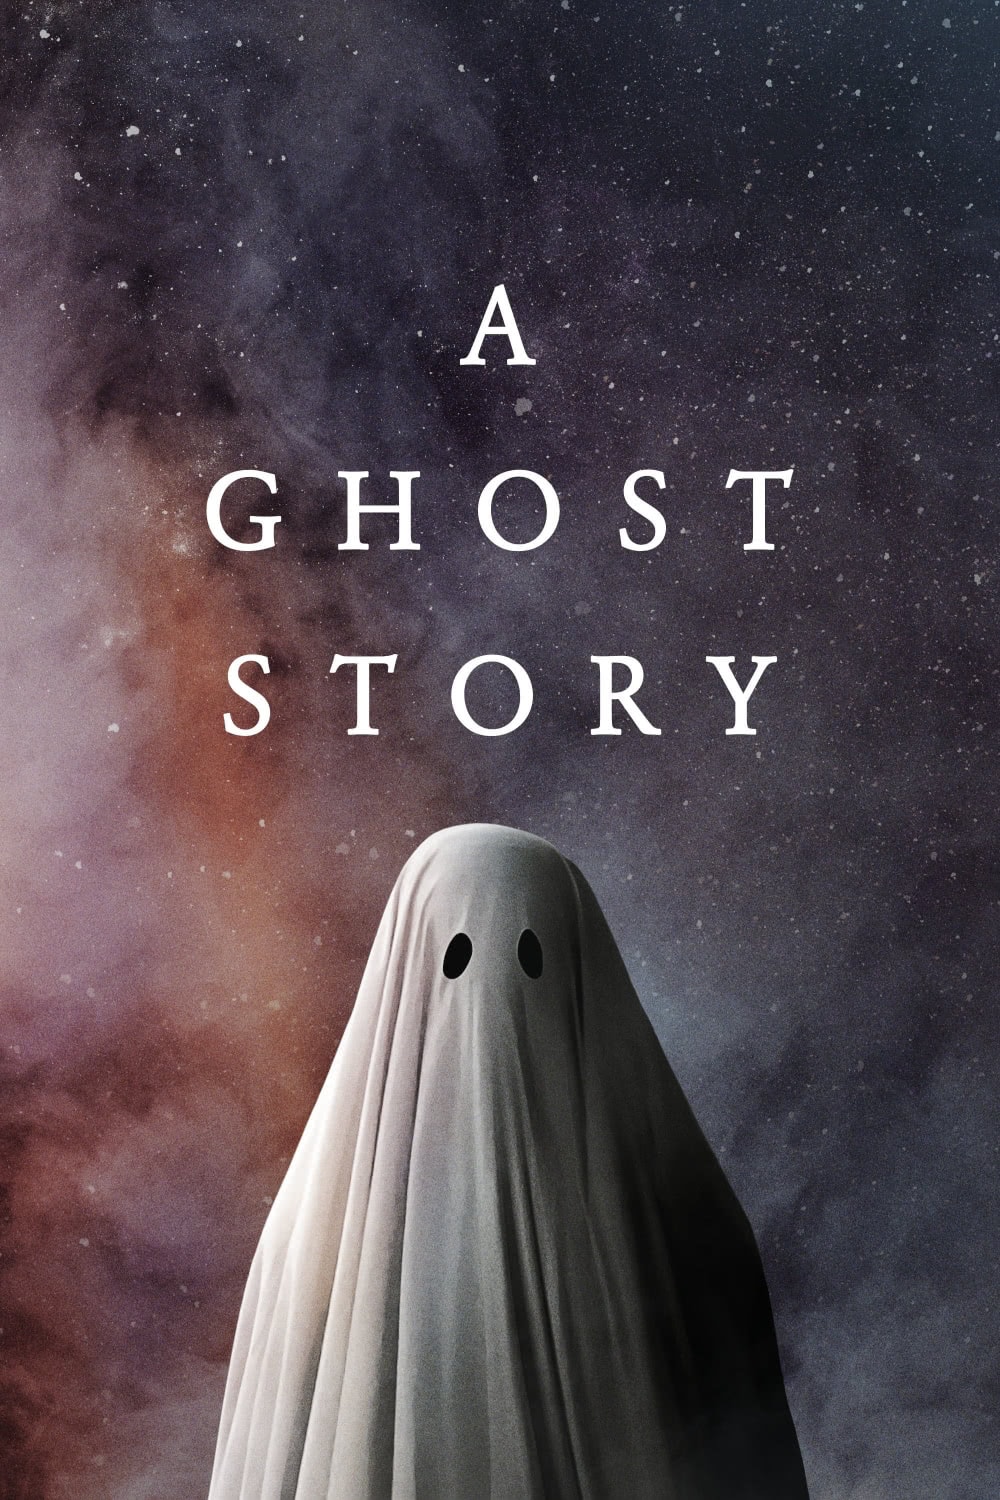 words to describe a ghost story